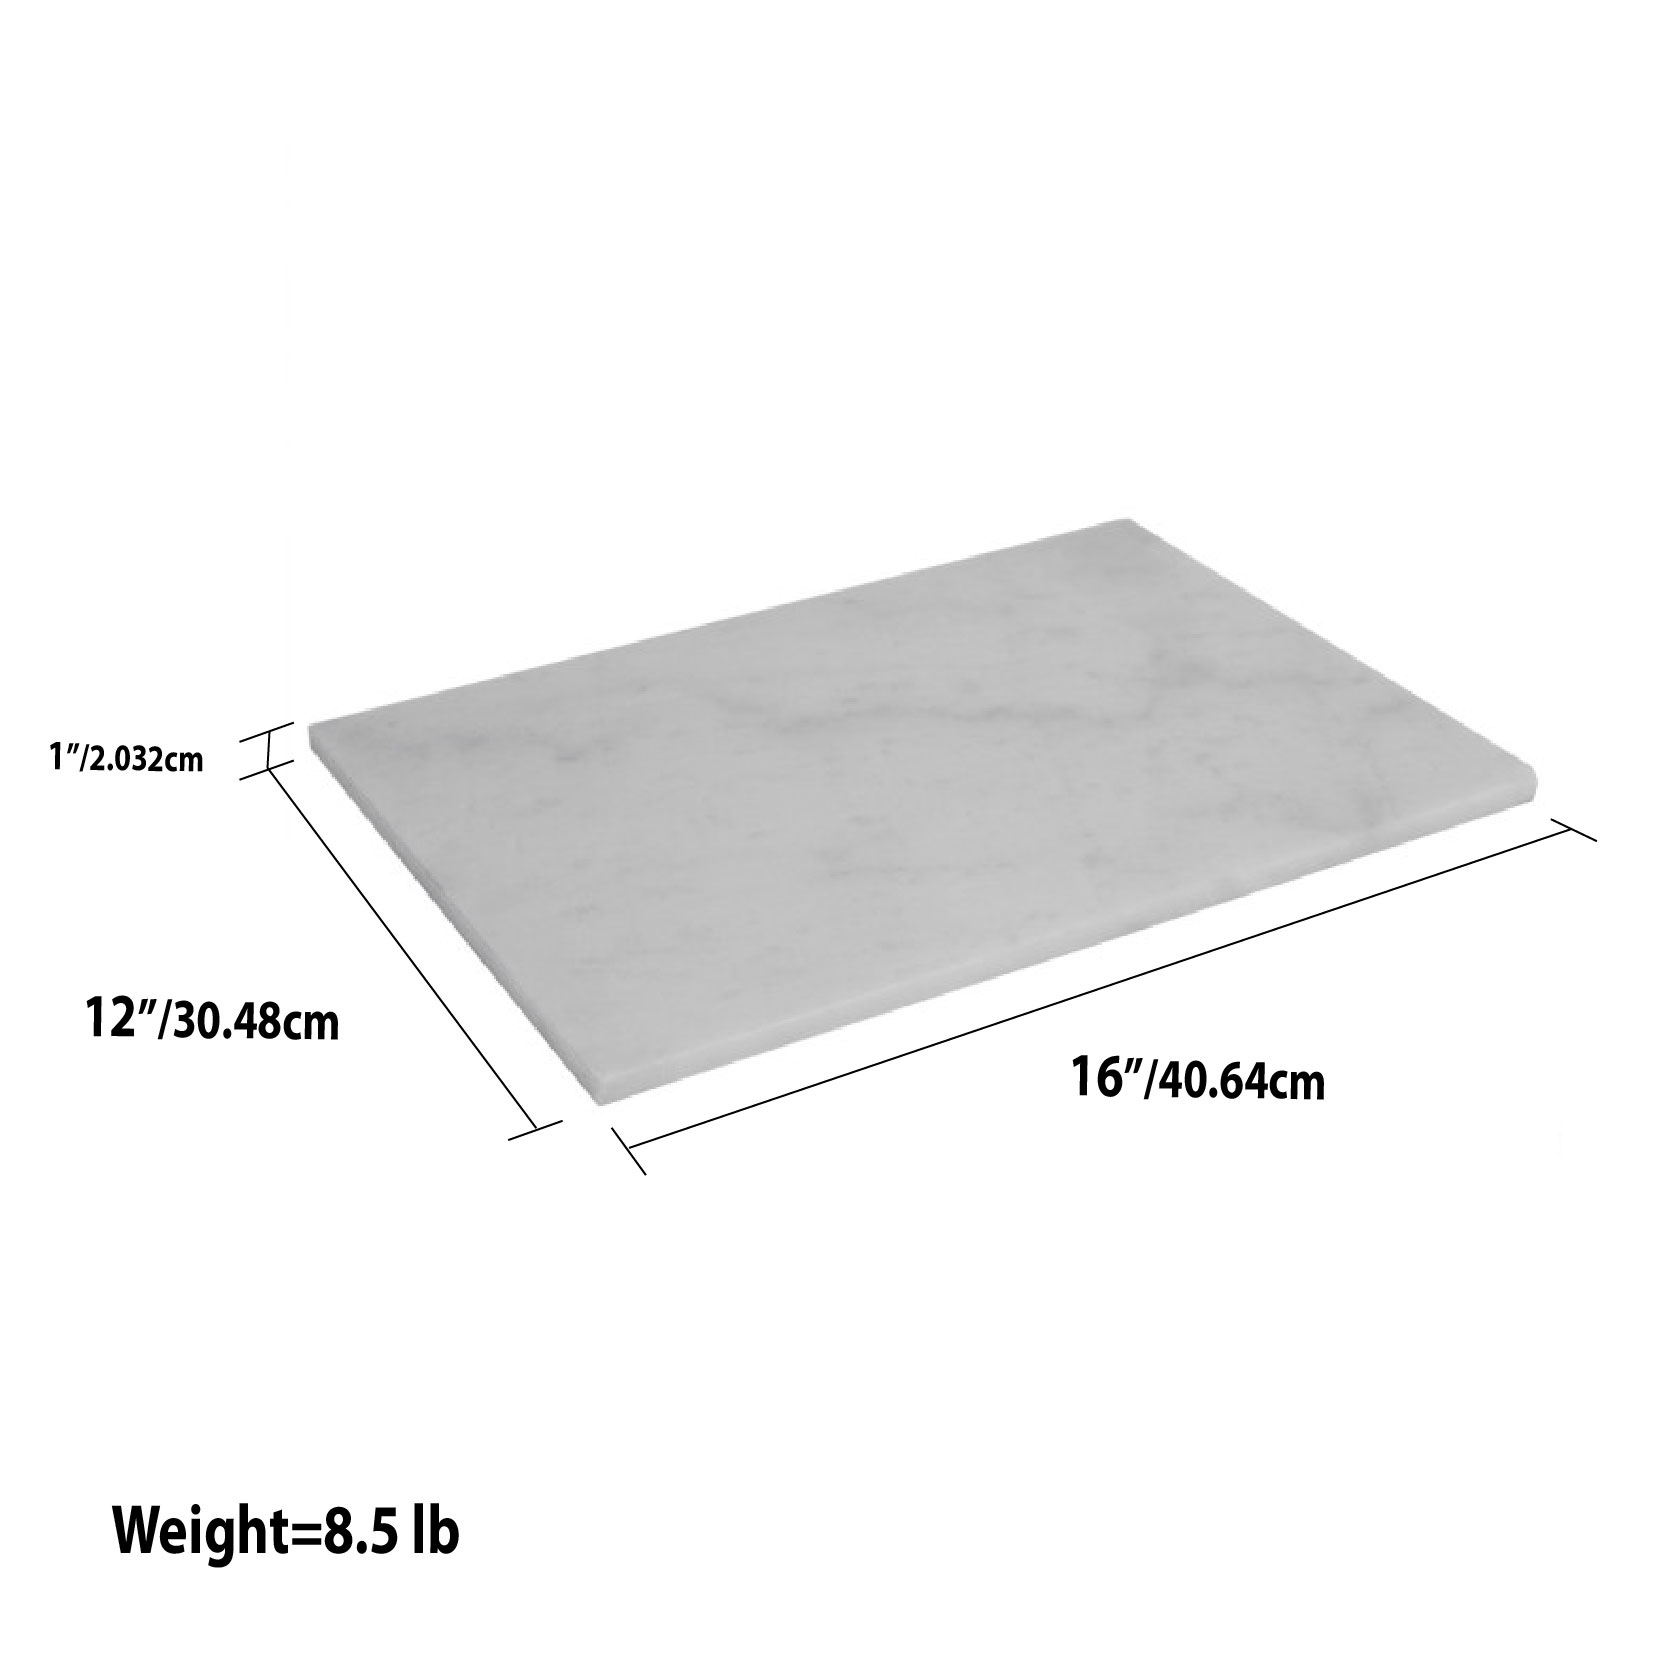 Home Basics 12" x 16" Marble Cutting Board, White - image 5 of 9